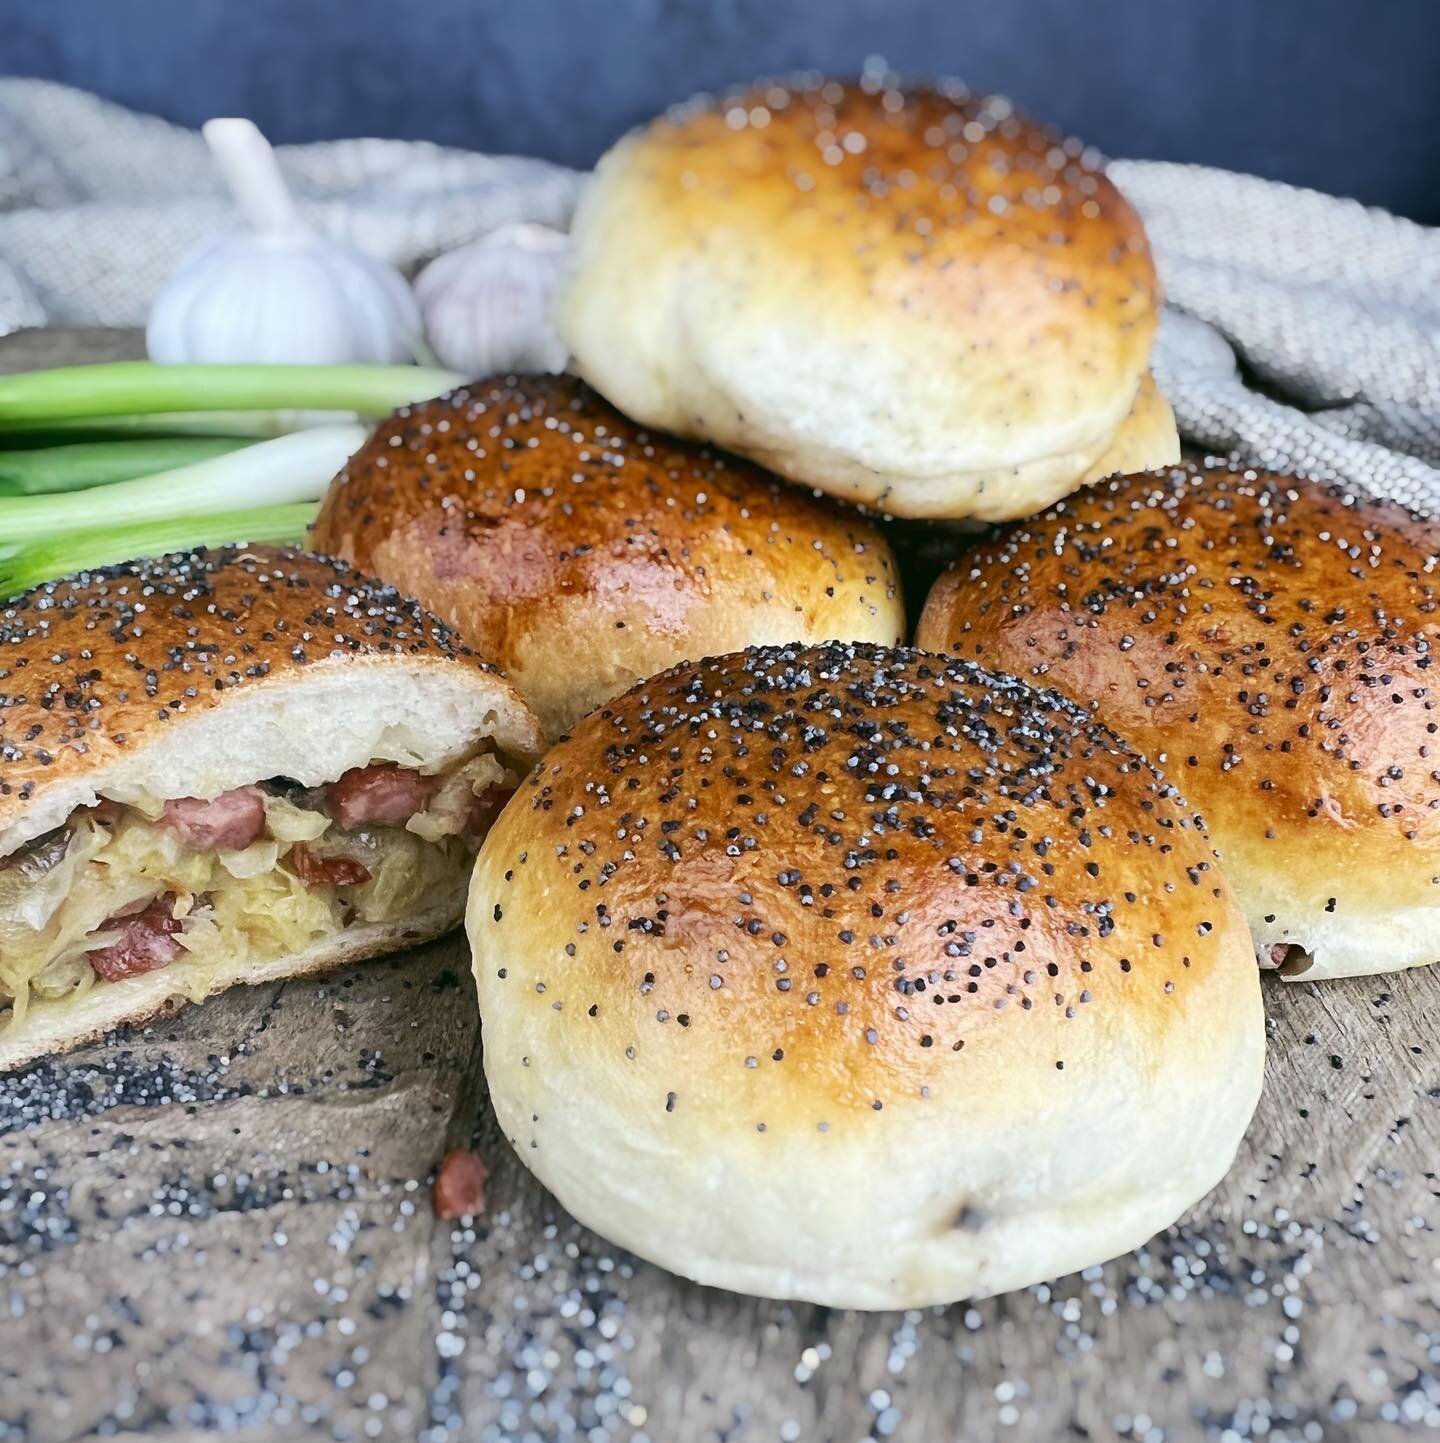 UKRAINIAN SAUERKRAUT &amp; SMOKED SAUSAGE STUFFED BUNS
When I married my handsome Ukrainian husband, I was determined to learn how to make all of the Ukrainian food he grew up on and loves. During our 33+ years of marriage, I&rsquo;ve also developed 